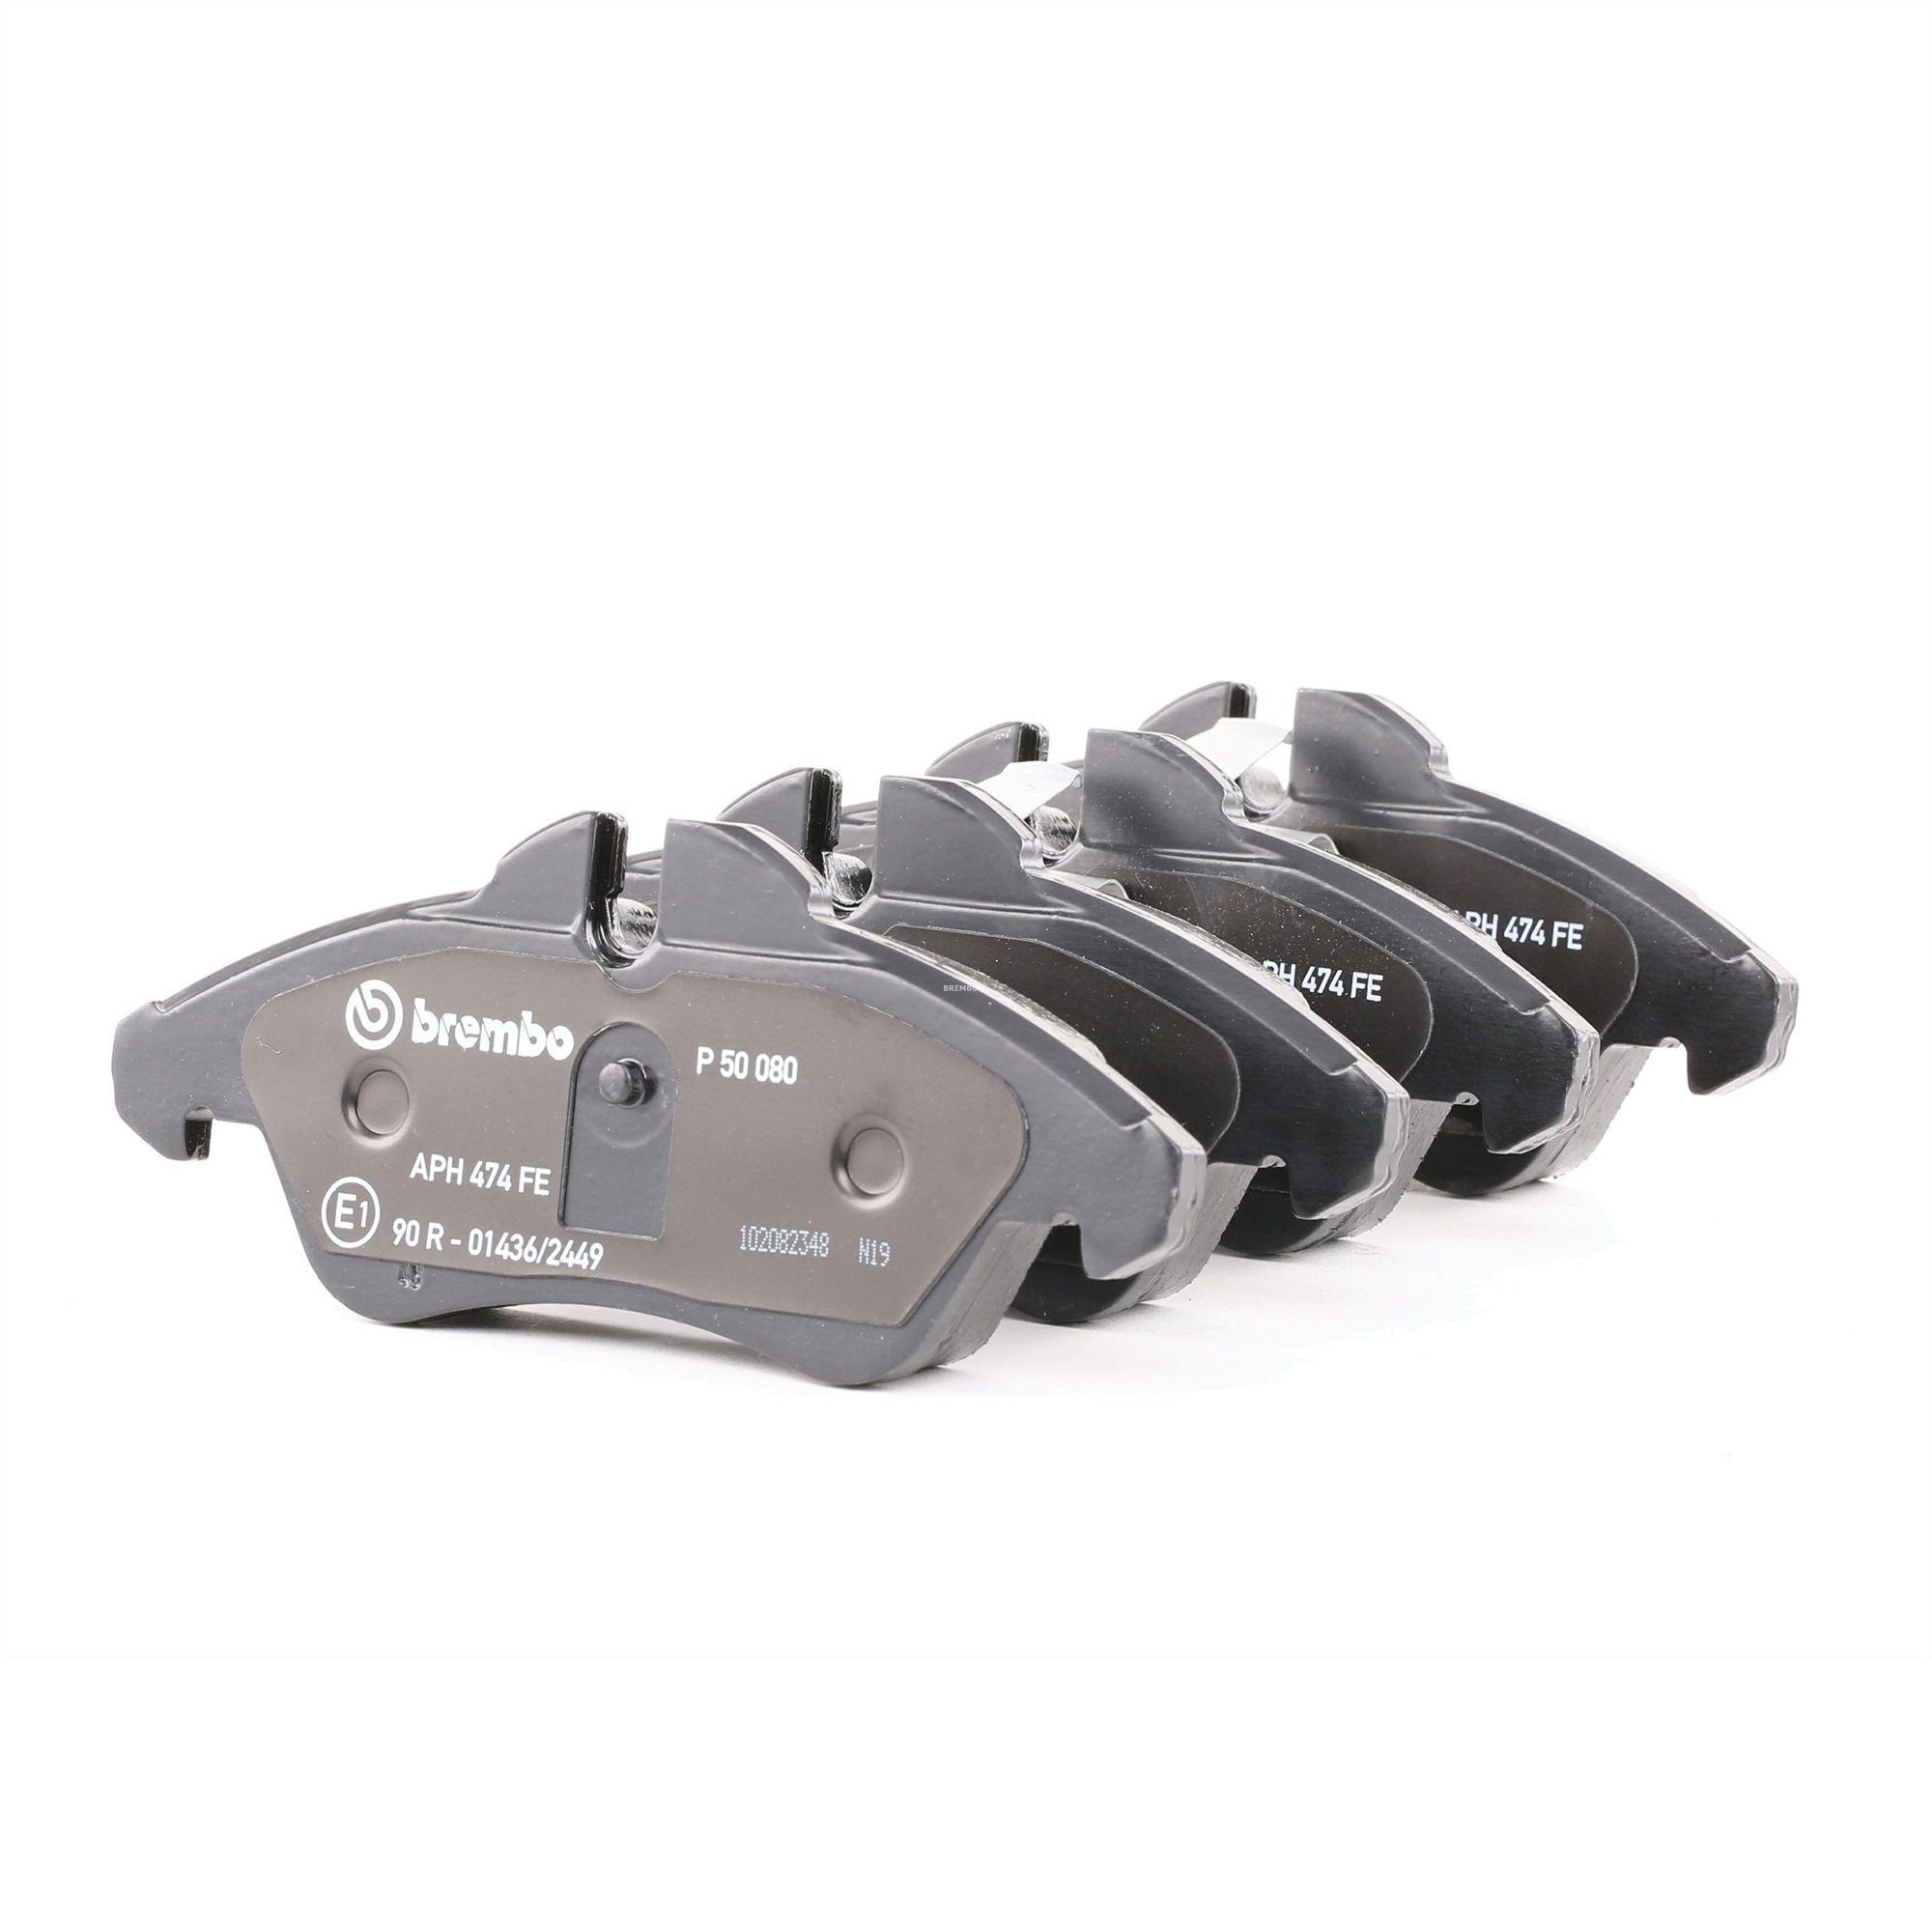 23990 BREMBO incl. wear warning contact, with piston clip, without accessories Height: 65mm, Width: 157mm, Thickness: 21mm Brake pads P 50 080 buy